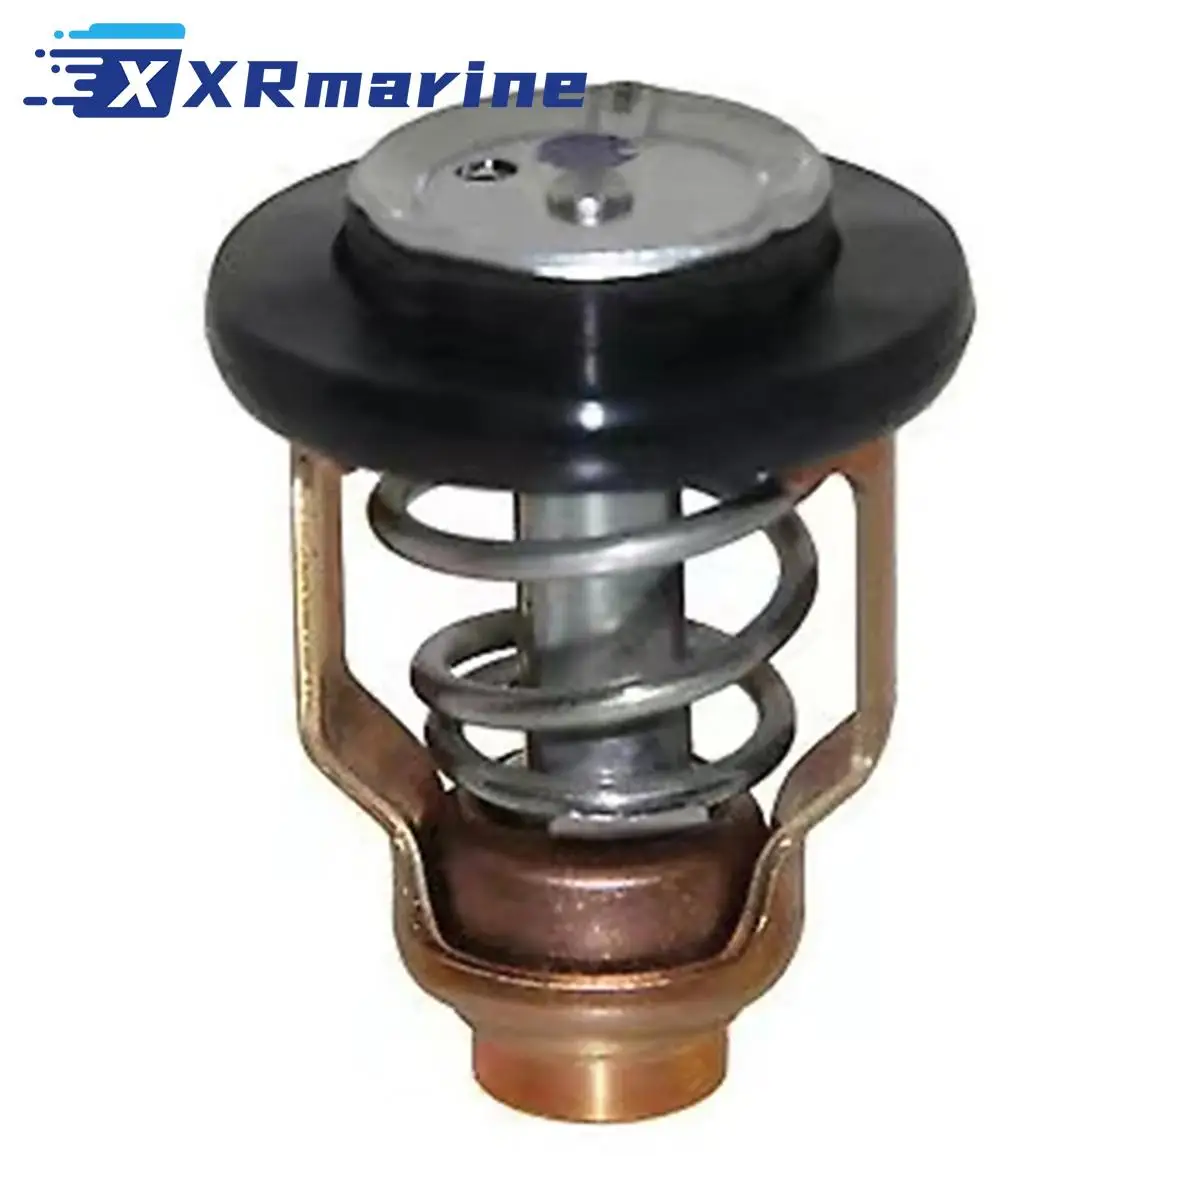 Thermostat 6D9-12411-00-00 for Yamaha 4 Stroke F80B F100D  Outboard Motor 6D9-12411-00 6D9-12411